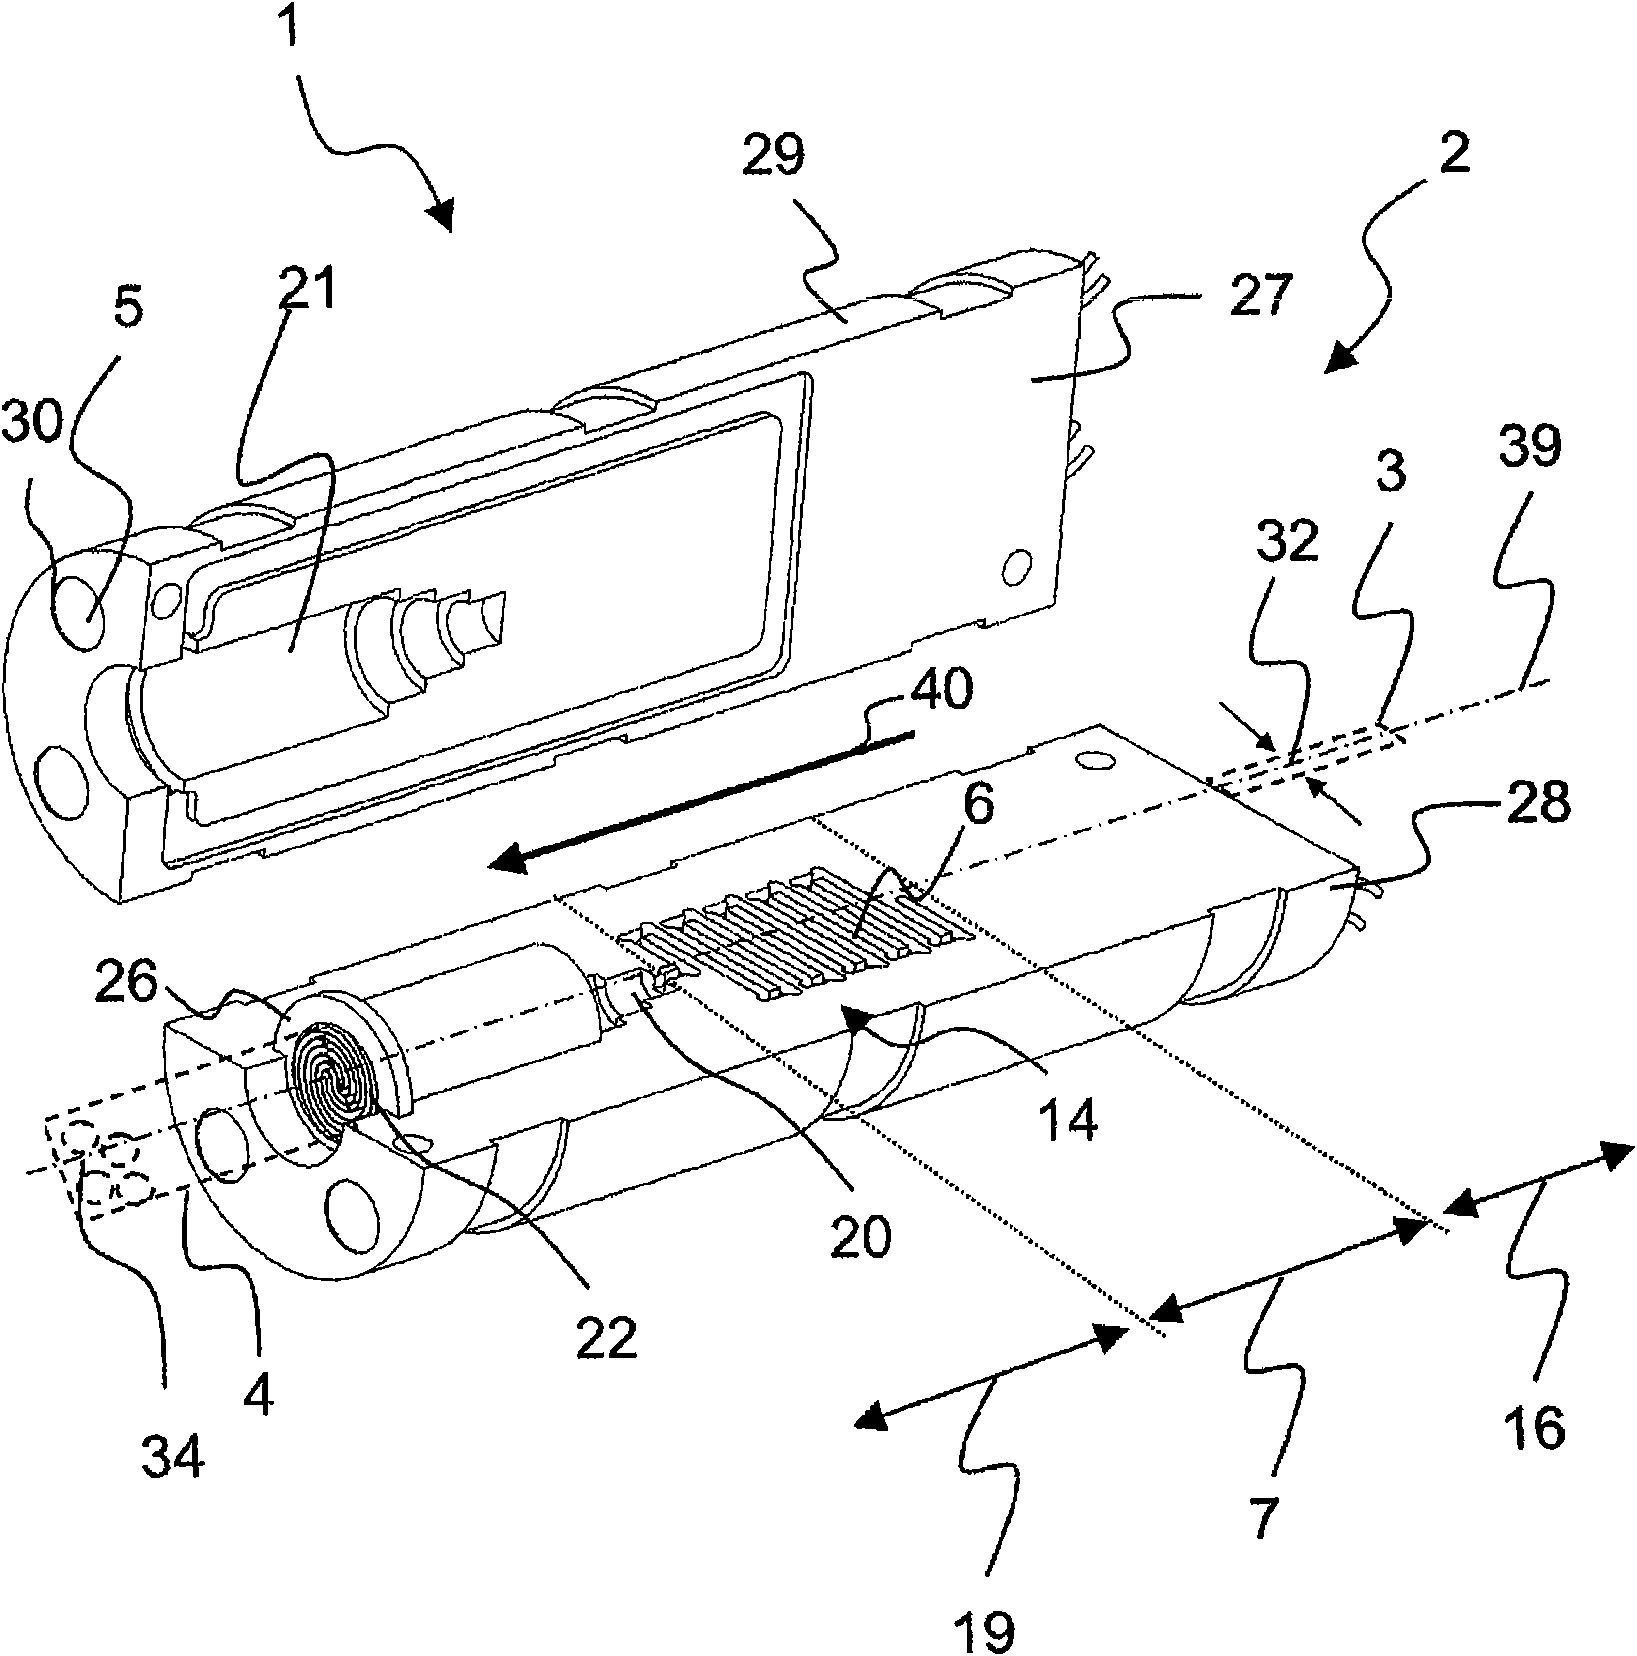 Evaporator for mobile anhydrous ammonia production, and method for manufacturing such an evaporator